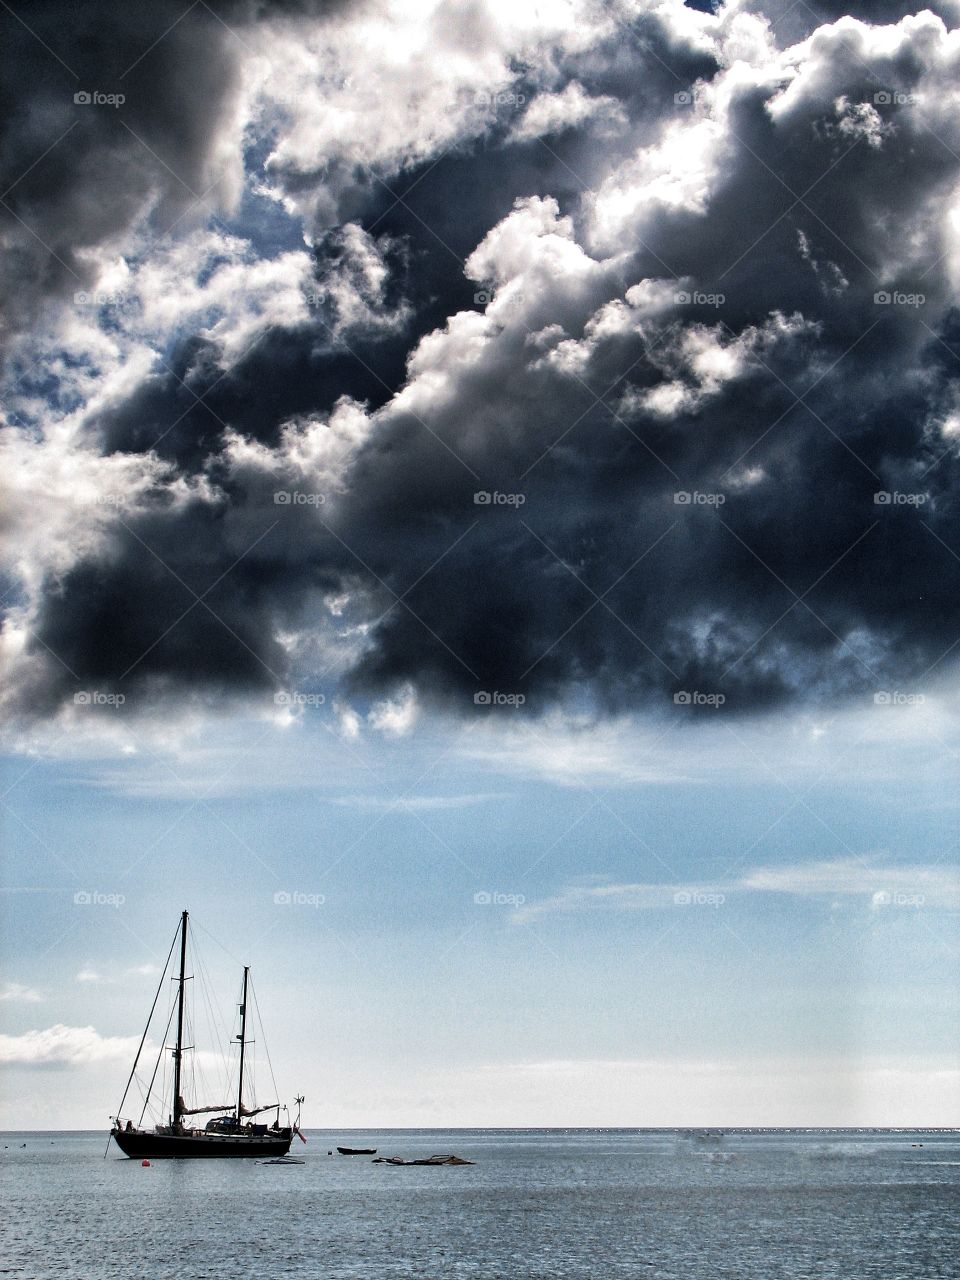 A black stormy cloud brewing above a single yacht floating on a calm sea.